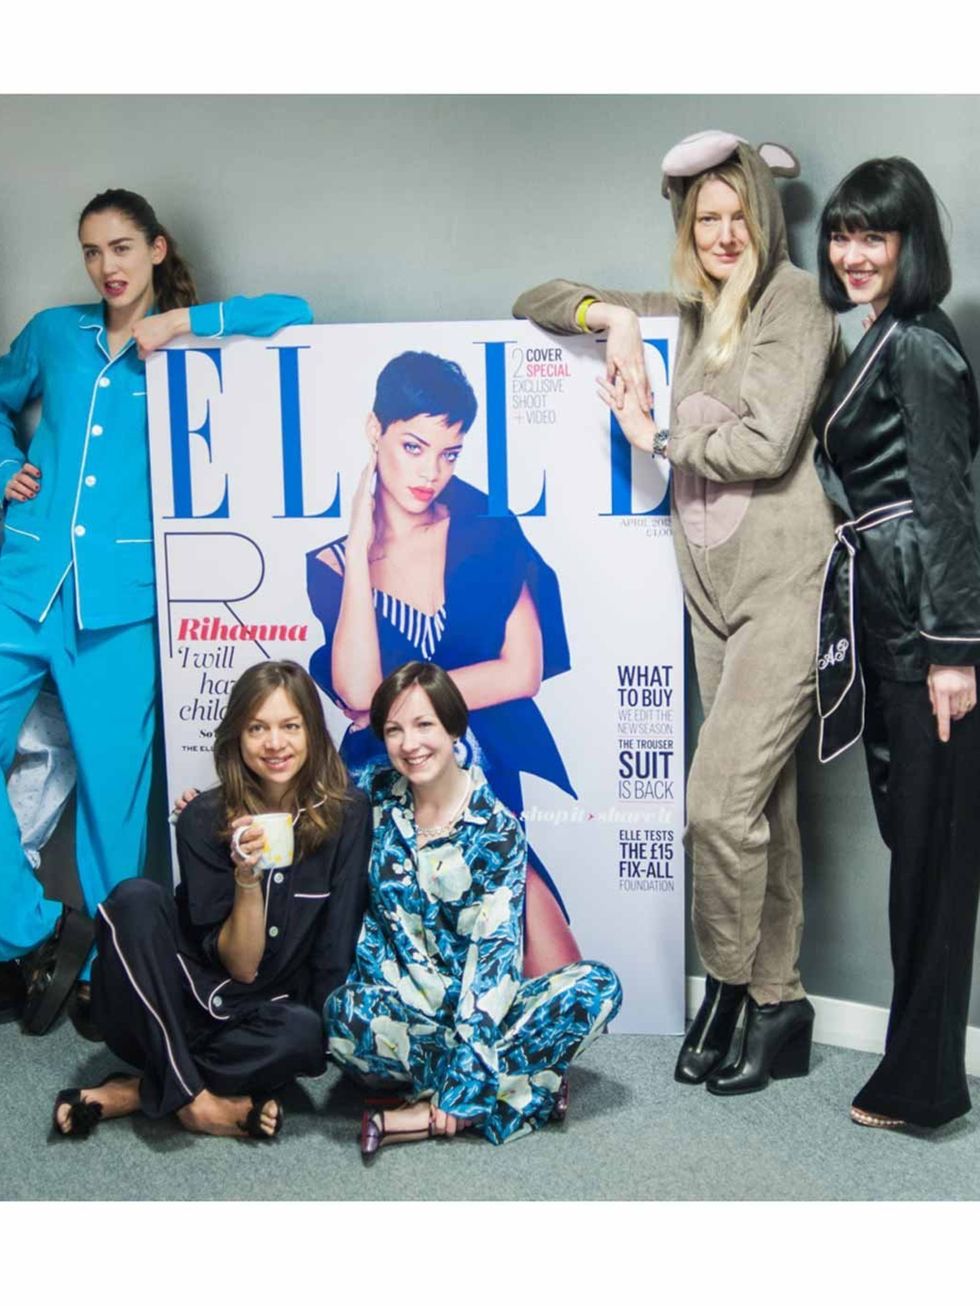 <p>Quick stop into the office for a shoot for the <a href="http://www.standard.co.uk/news/dispossessed/londoners-brave-the-weather-to-join-great-jimjamboree-8536015.html">Evening Standard</a>. The girls in glam PJ's, plus me in my monkey onesie. </p>